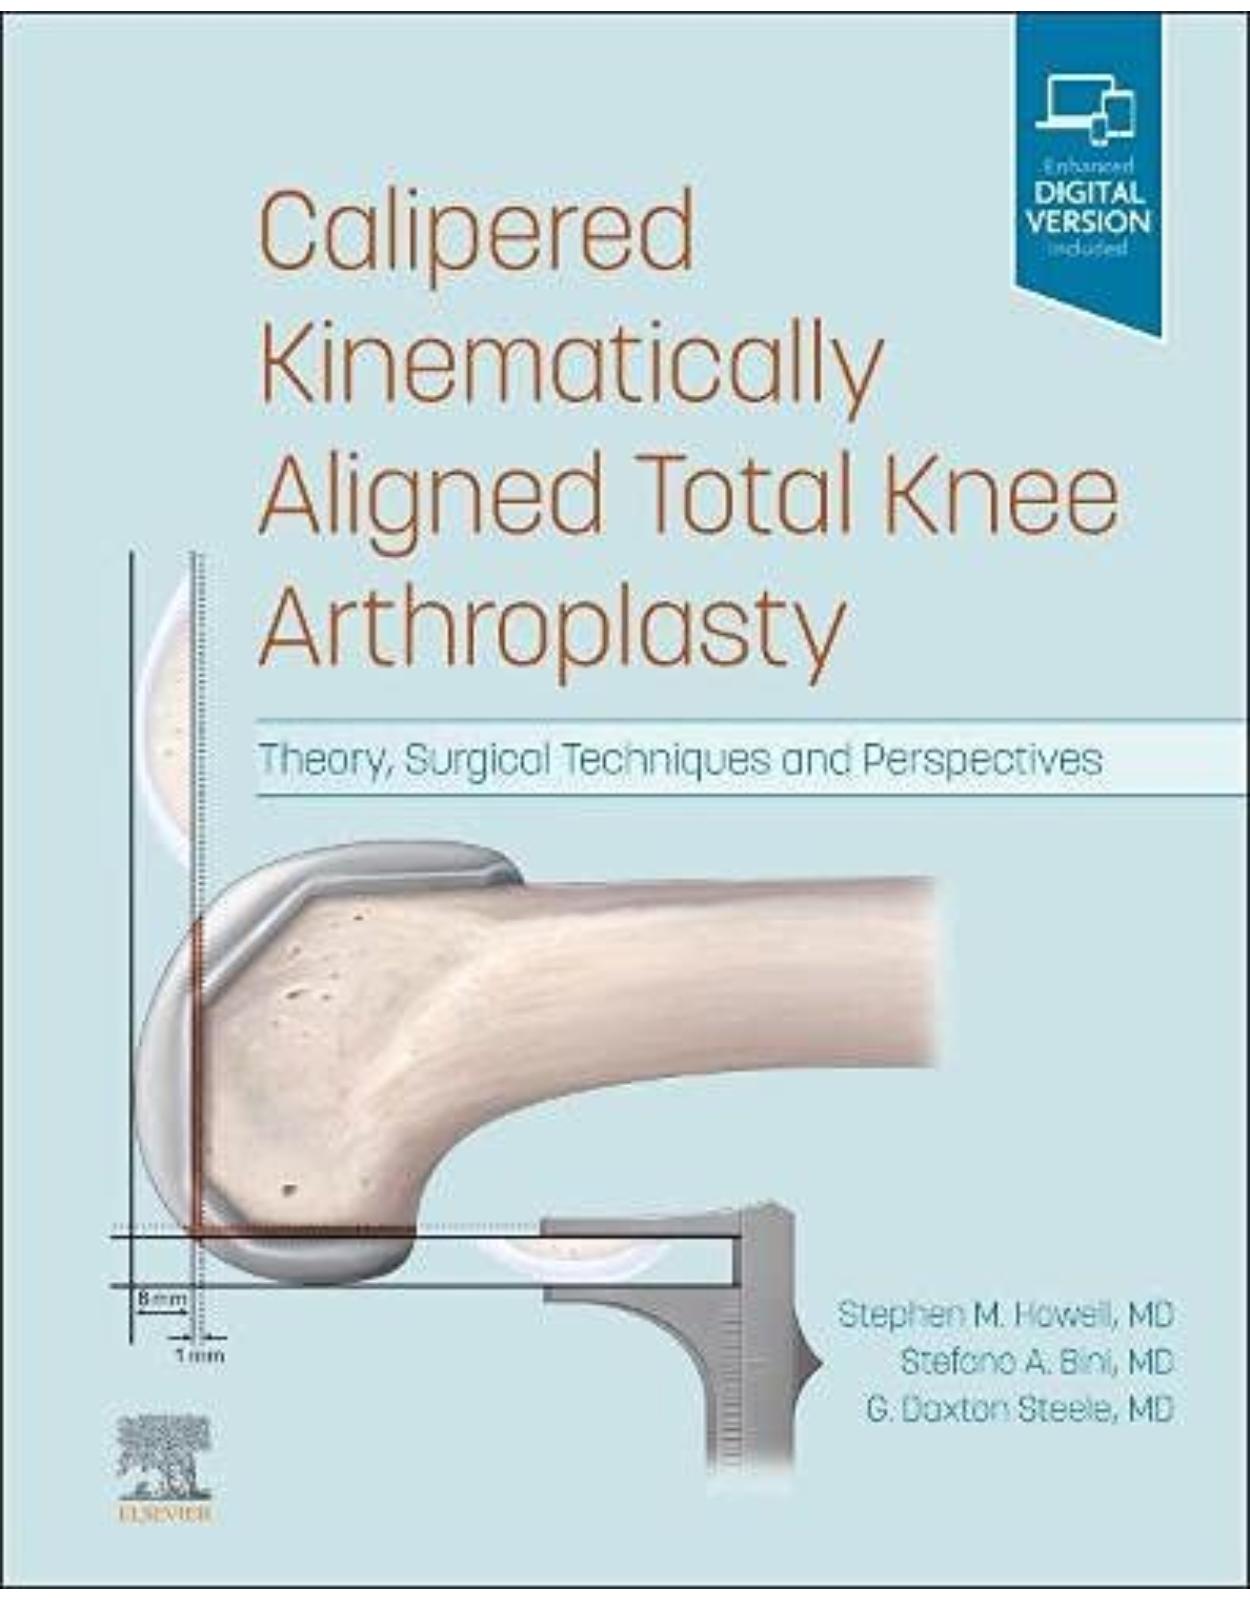 Calipered Kinematically aligned Total Knee Arthroplasty: Theory, Surgical Techniques and Perspectives